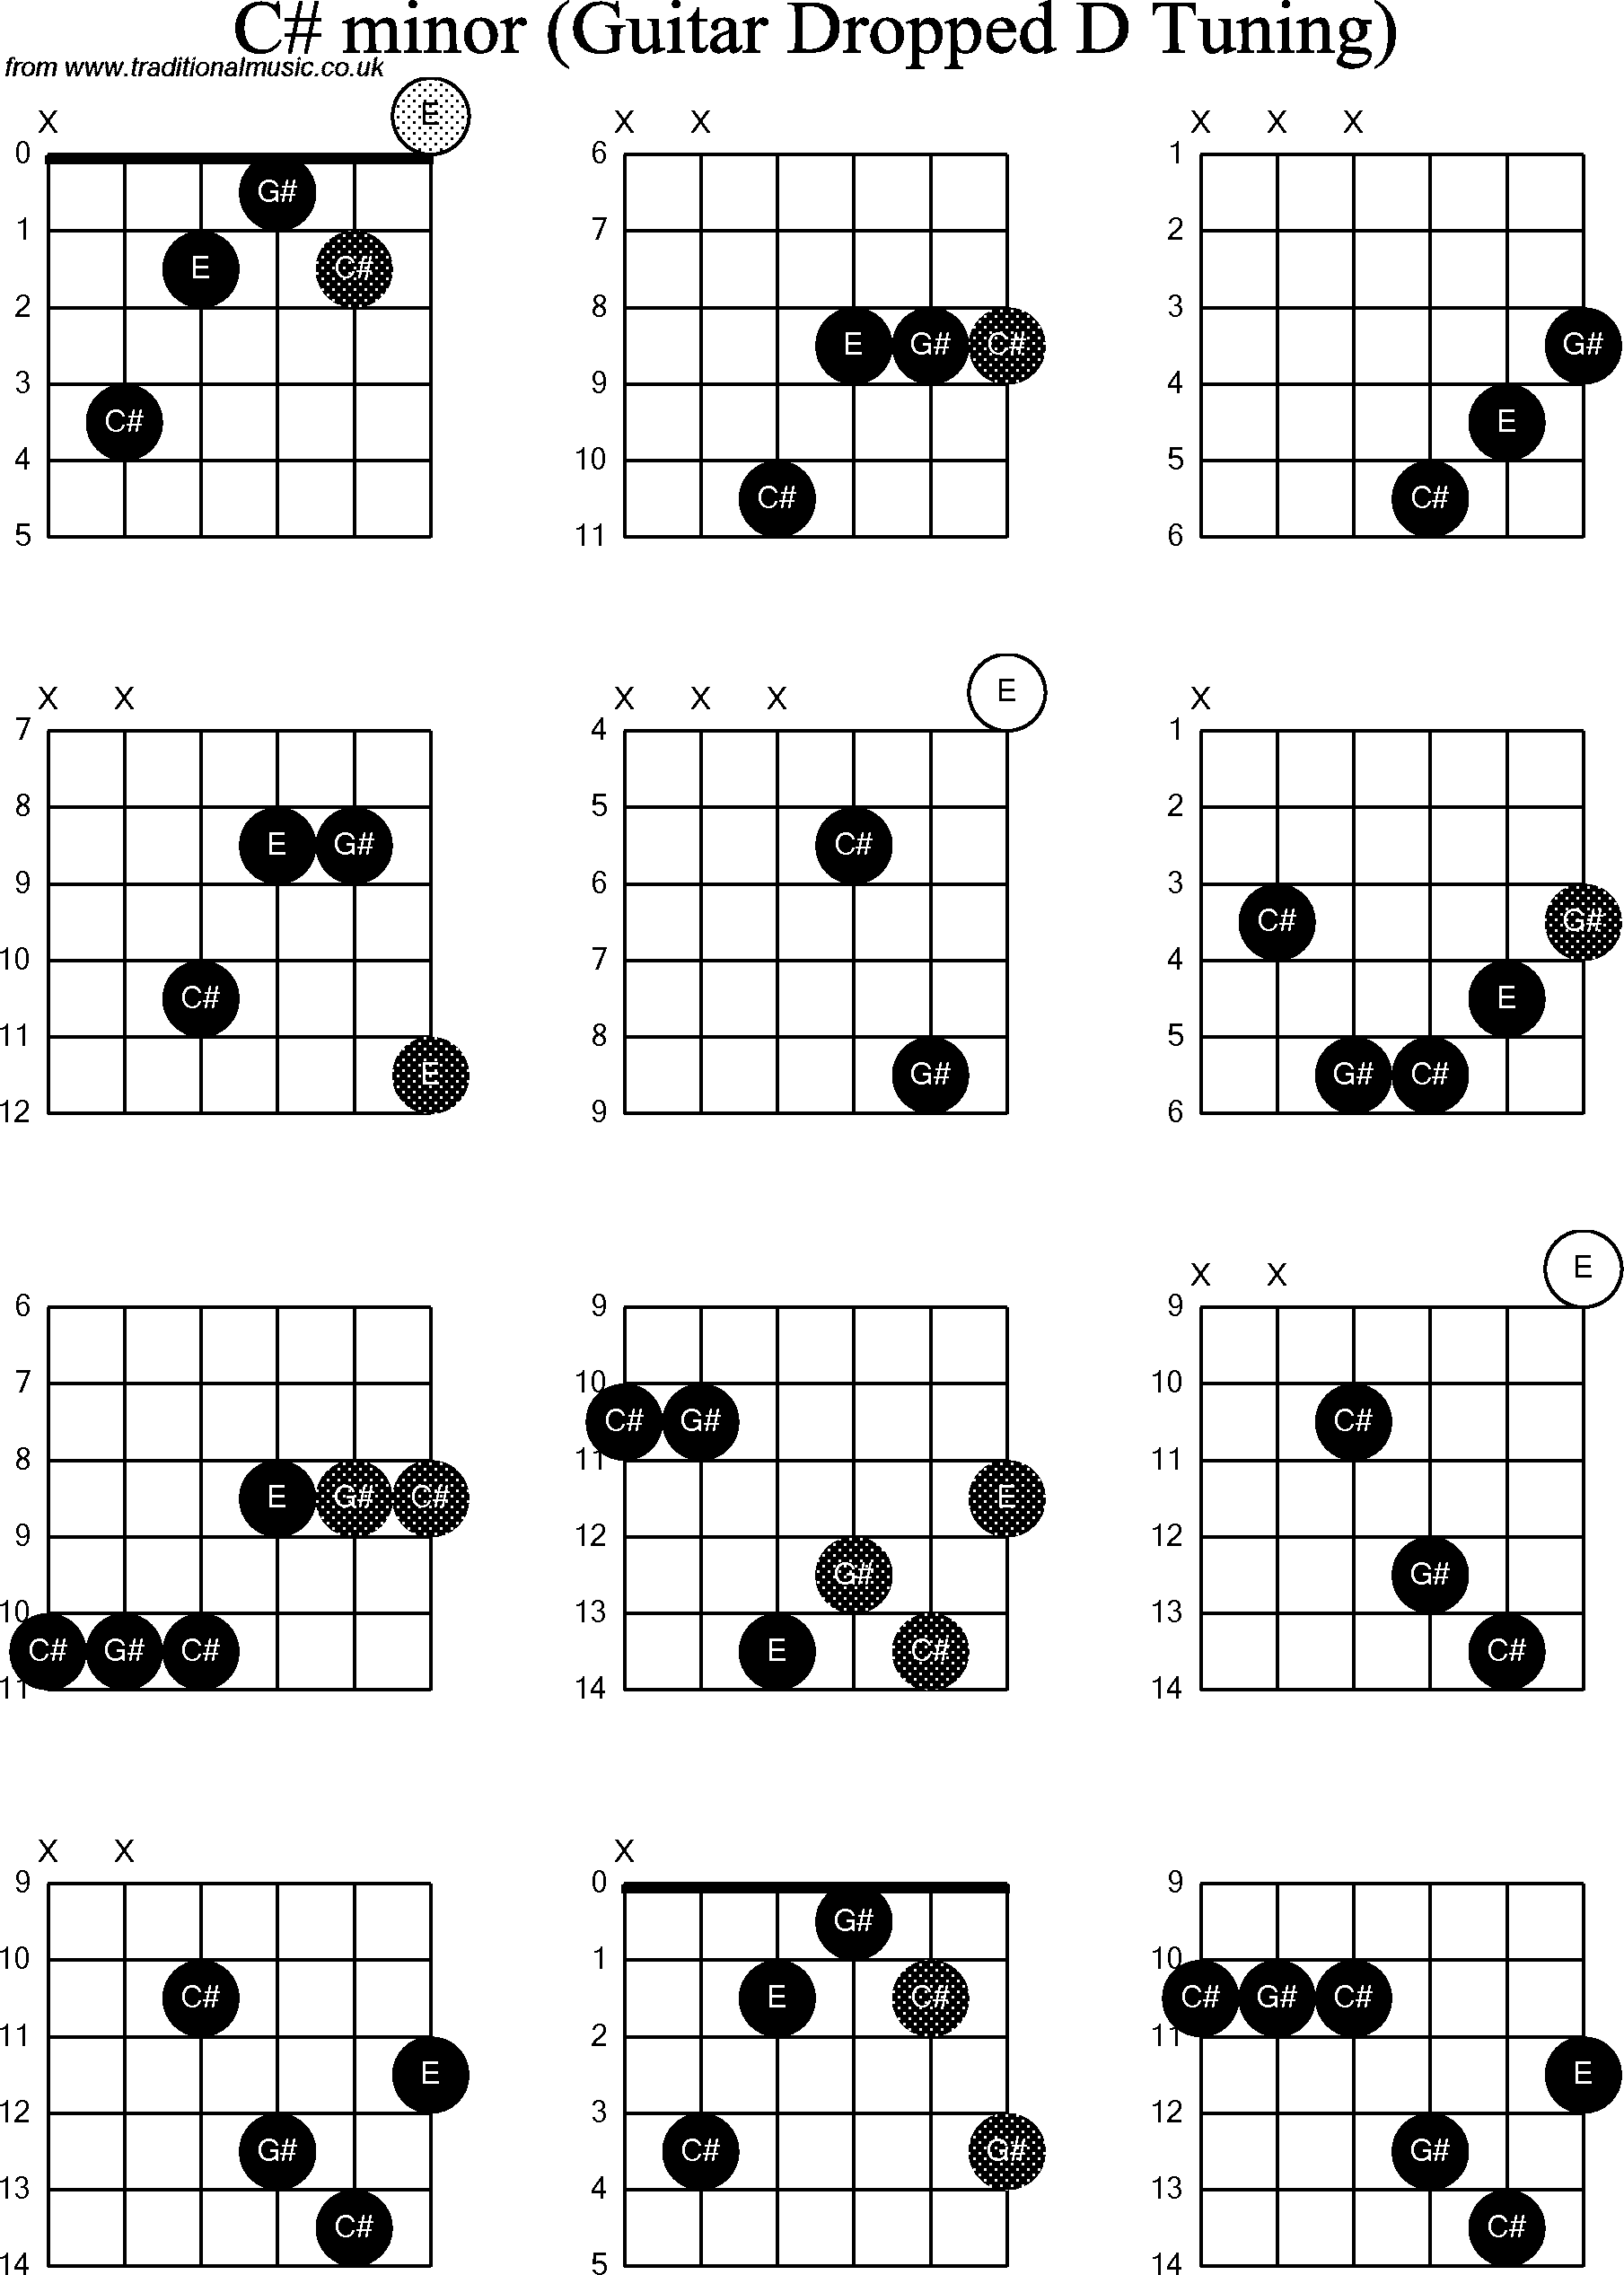 Chord diagrams for dropped D Guitar(DADGBE), C Sharp Minor